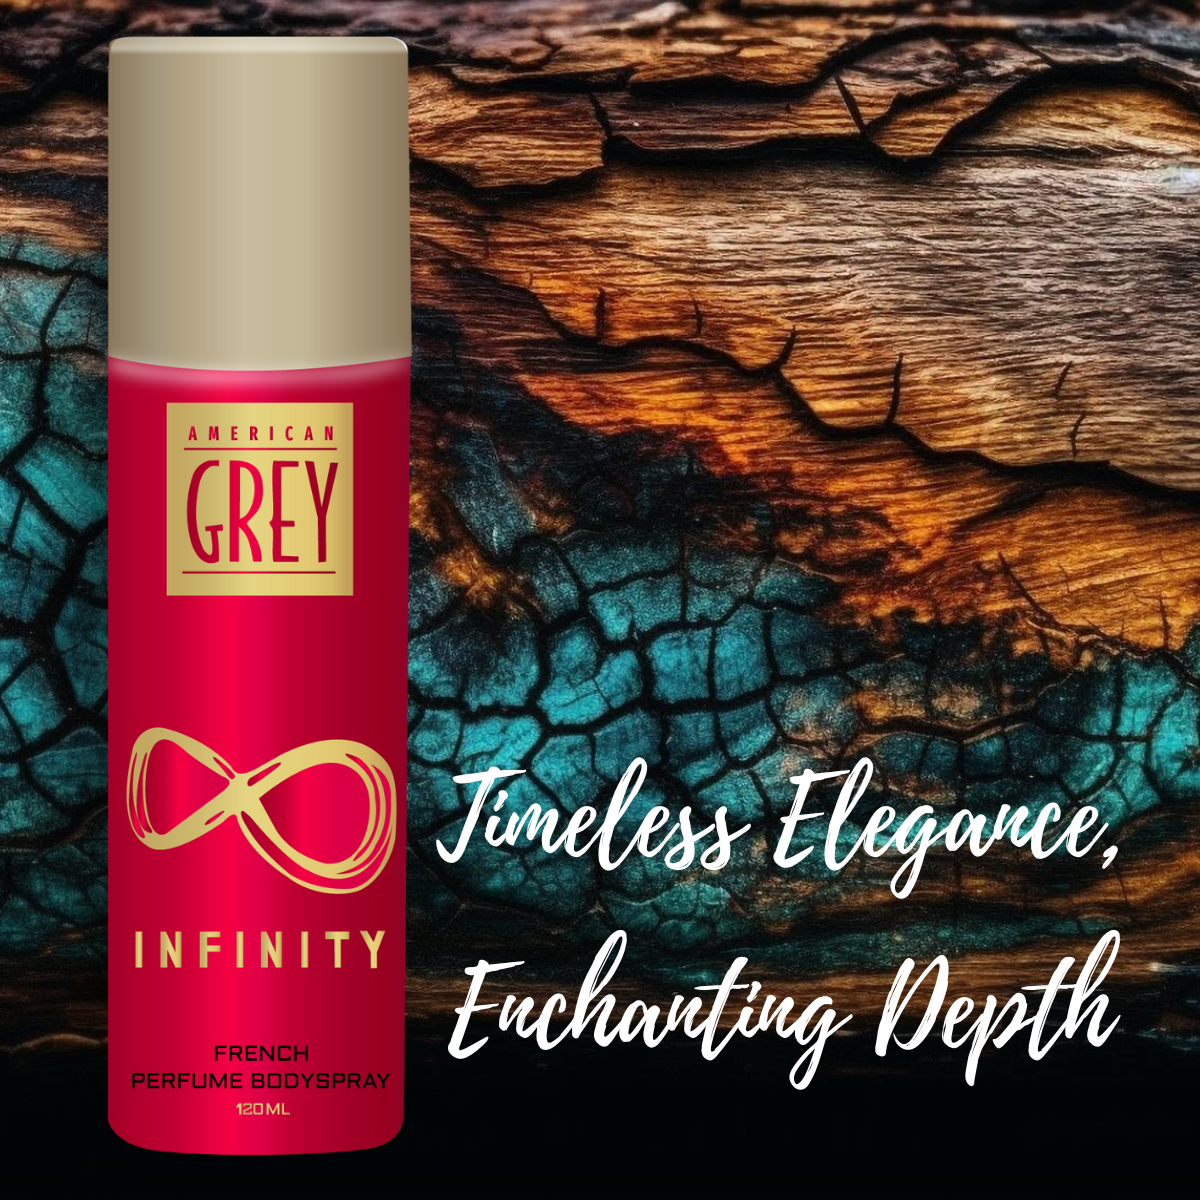 american grey infinity deo, infinity deo, american grey deo, dupe of tom ford noir, sensual fragrance, oriental fragrance, infinity deo for men, top deodorant for men, best deo for men, best long lasting deo for men, top 10 deo for men, best perfume deo for men, alcohol free deo for men, american grey best deo, best men body deodorant, best selling men deodorant,Tom Ford Noir dupe fragrances, Men deodorant with oriental scent, Budget-friendly Tom Ford Noir-inspired deodorants, Similar scents to Tom Ford Noir